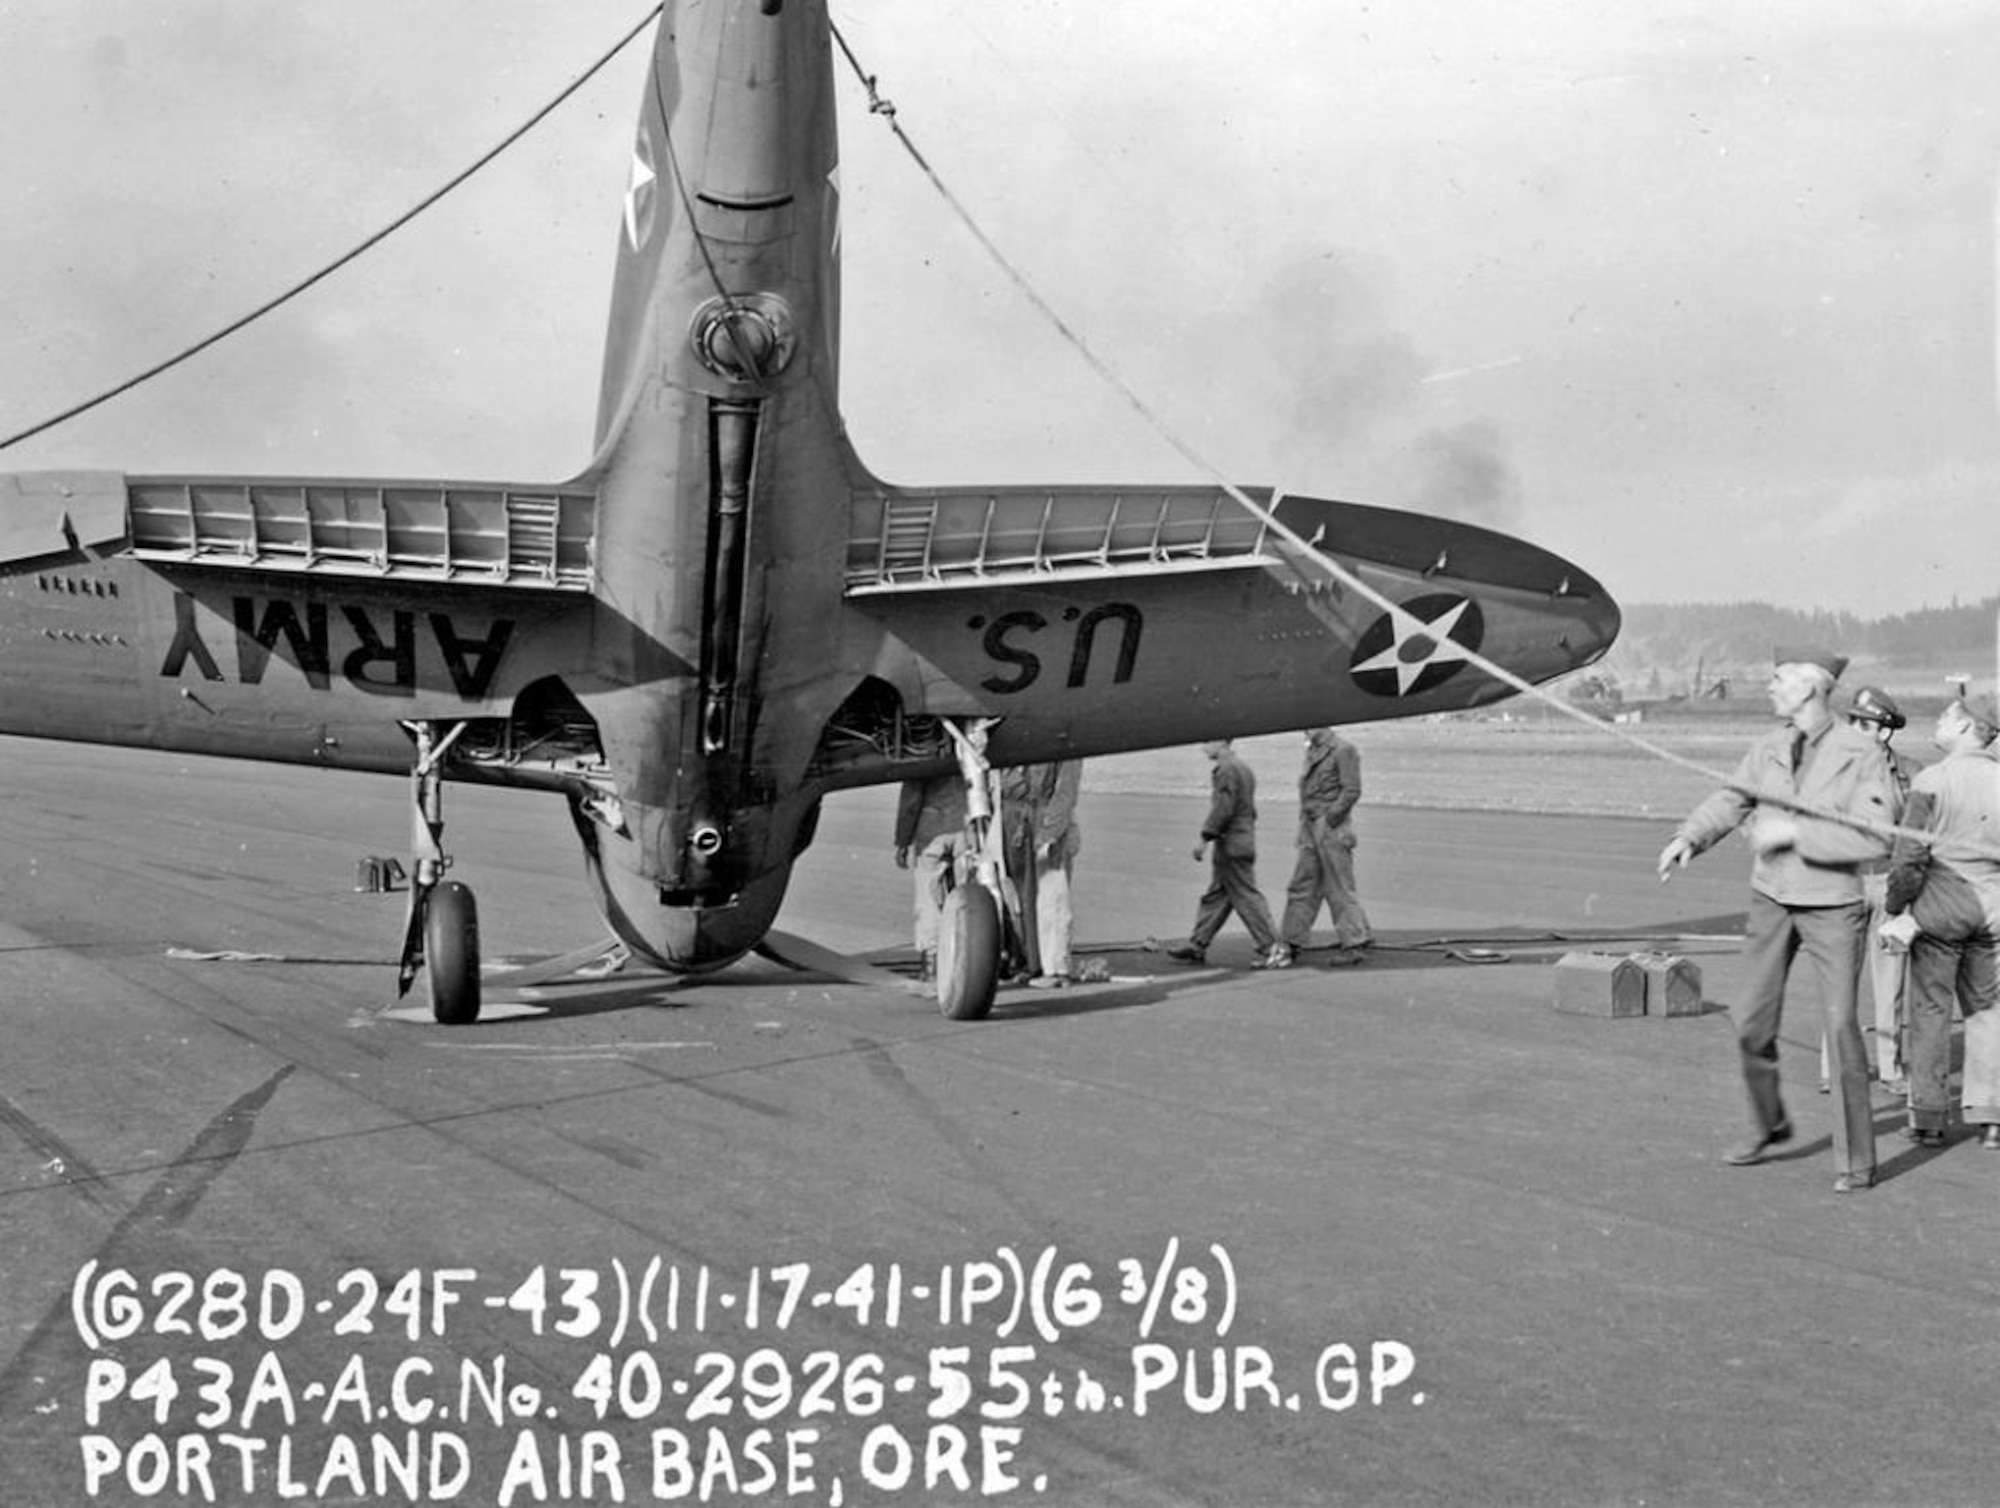 Republic P-43A Lancer serial number 40-2926 flown by 2nd Lt. Donald E. Houseal of the 54th Pursuit Squadron nosed-over on the hard surface after landing at Portland AAB, 17 November 1941.  Ground crew survey the mishap scene and determine a course of action.  Note the tool boxes at right, and an officer, perhaps the pilot, at right in sunglasses.  The long ducting on the bottom of the fuselage is part of the aircraft’s turbo-supercharger system, an engine related feature which enabled improved performance at higher altitudes. A key design feature included with some improvements in the P-43’s successor, the Republic P-47 Thunderbolt.  (Courtesy Mr. Jack Cook)